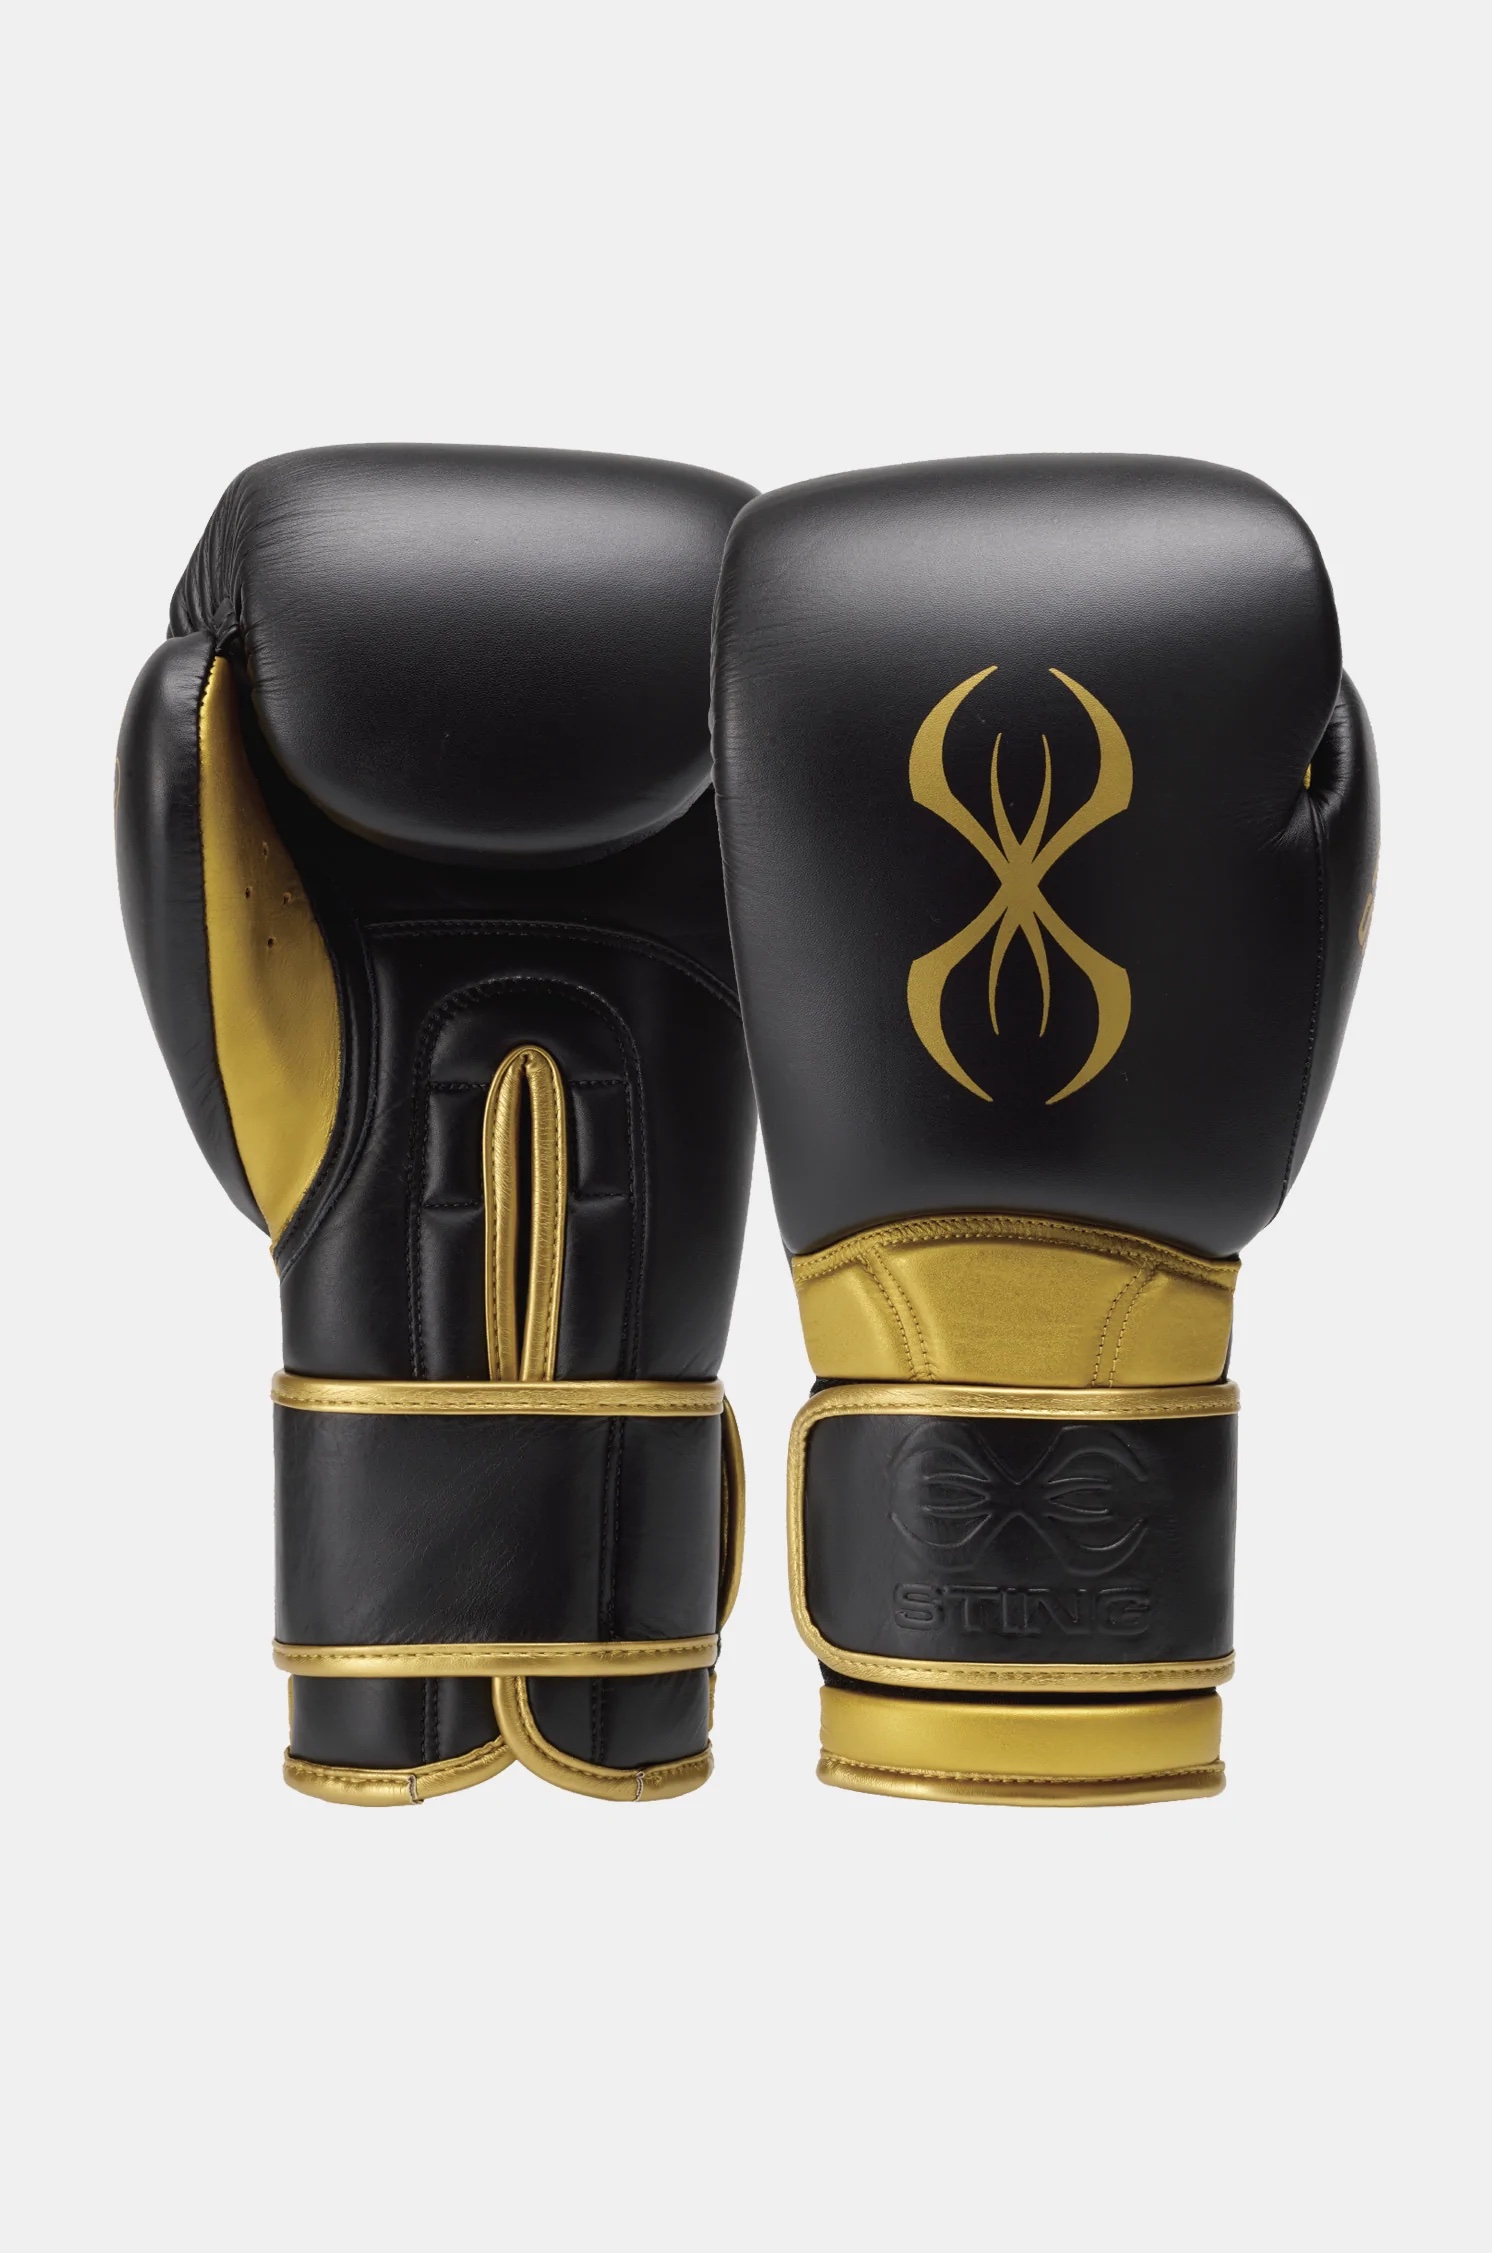 Sting Viper X Boxing Sparring Gloves